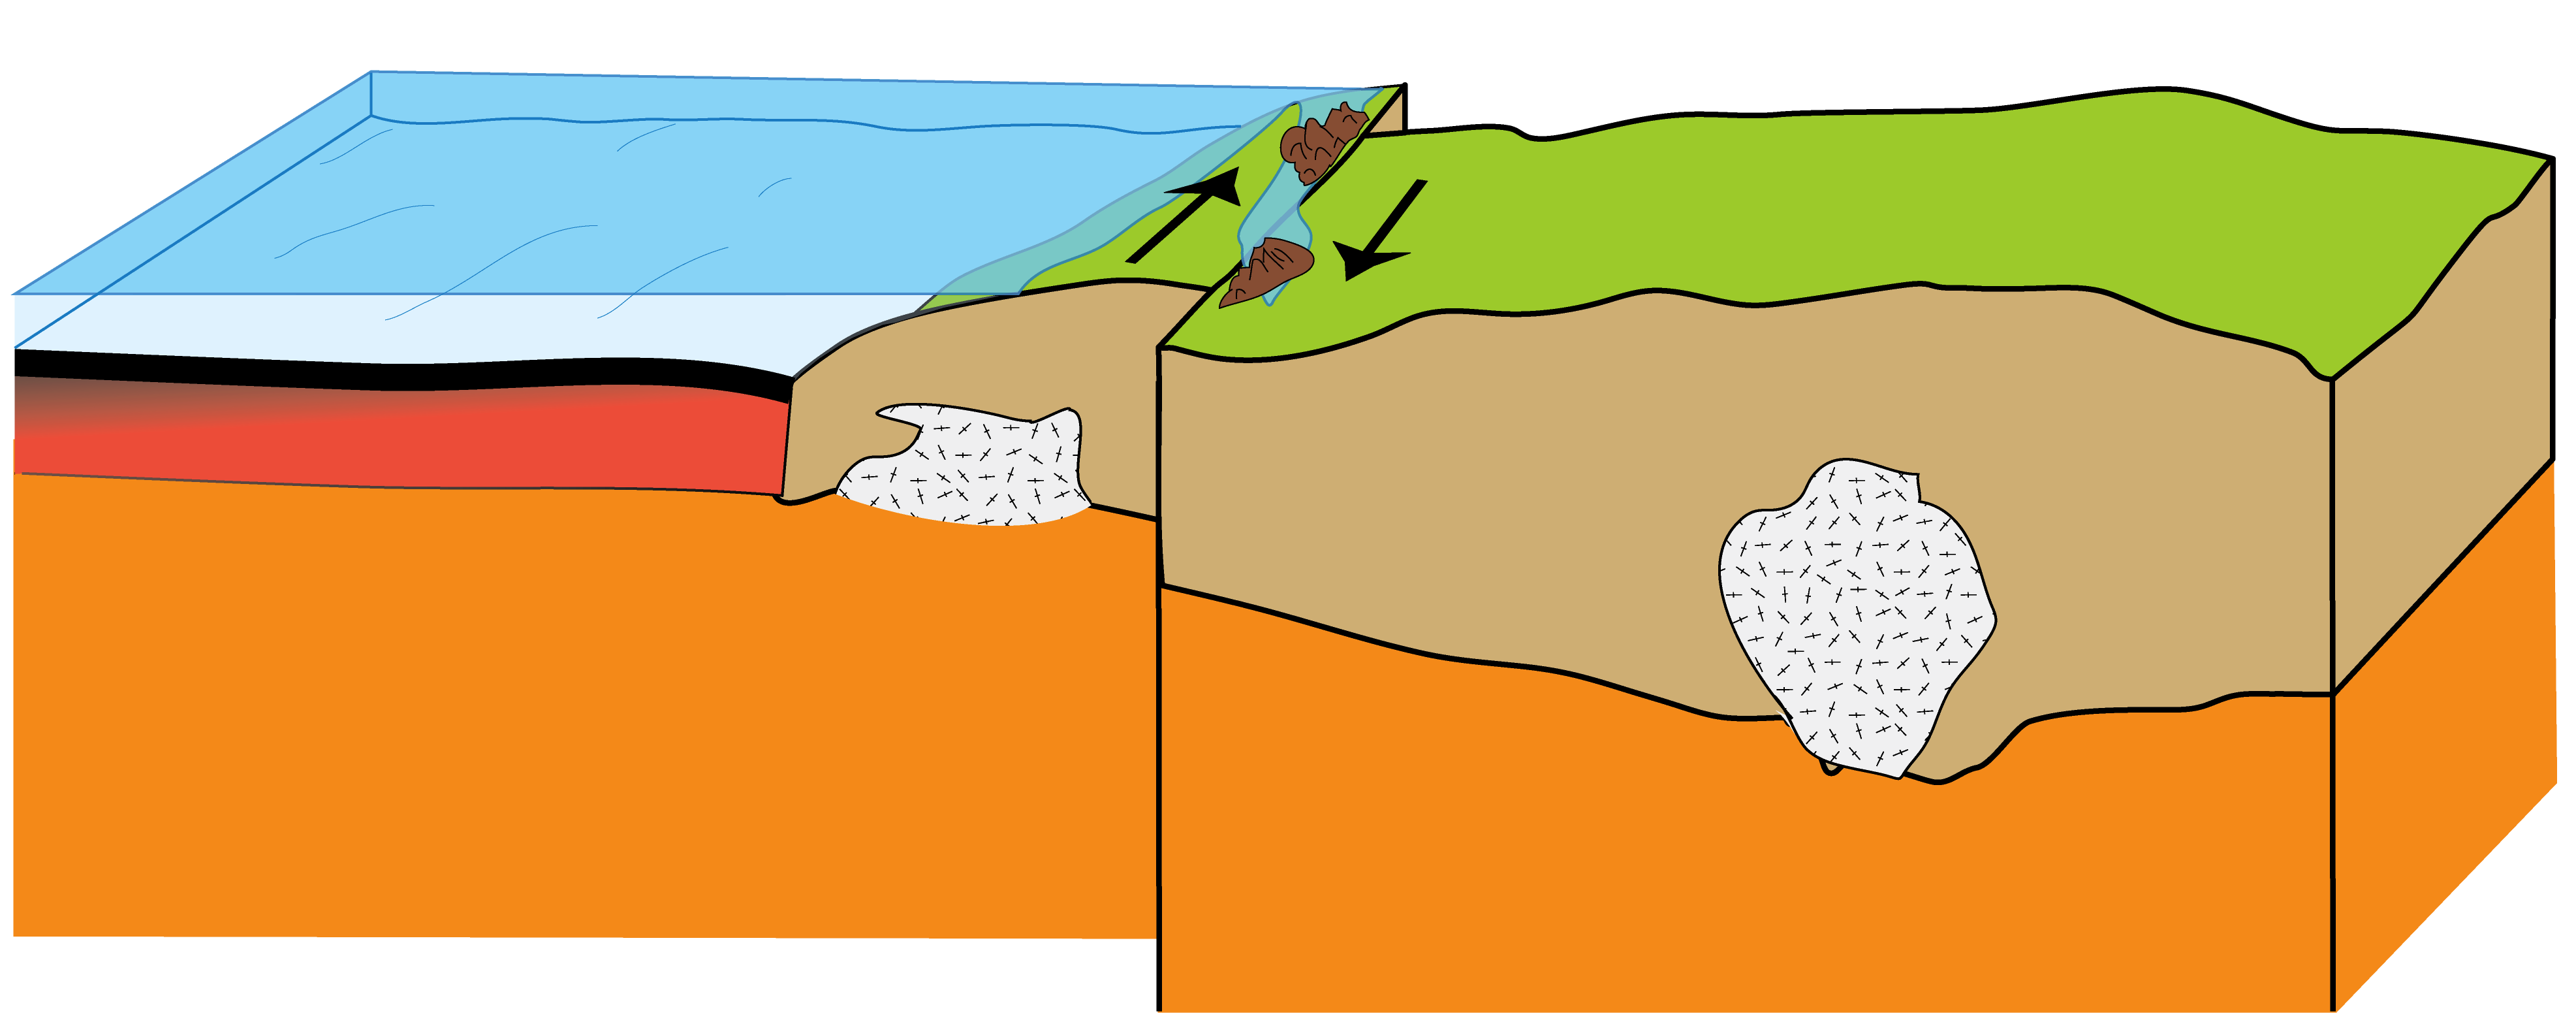 Geology pinnacles national park. Clipart science hot plate